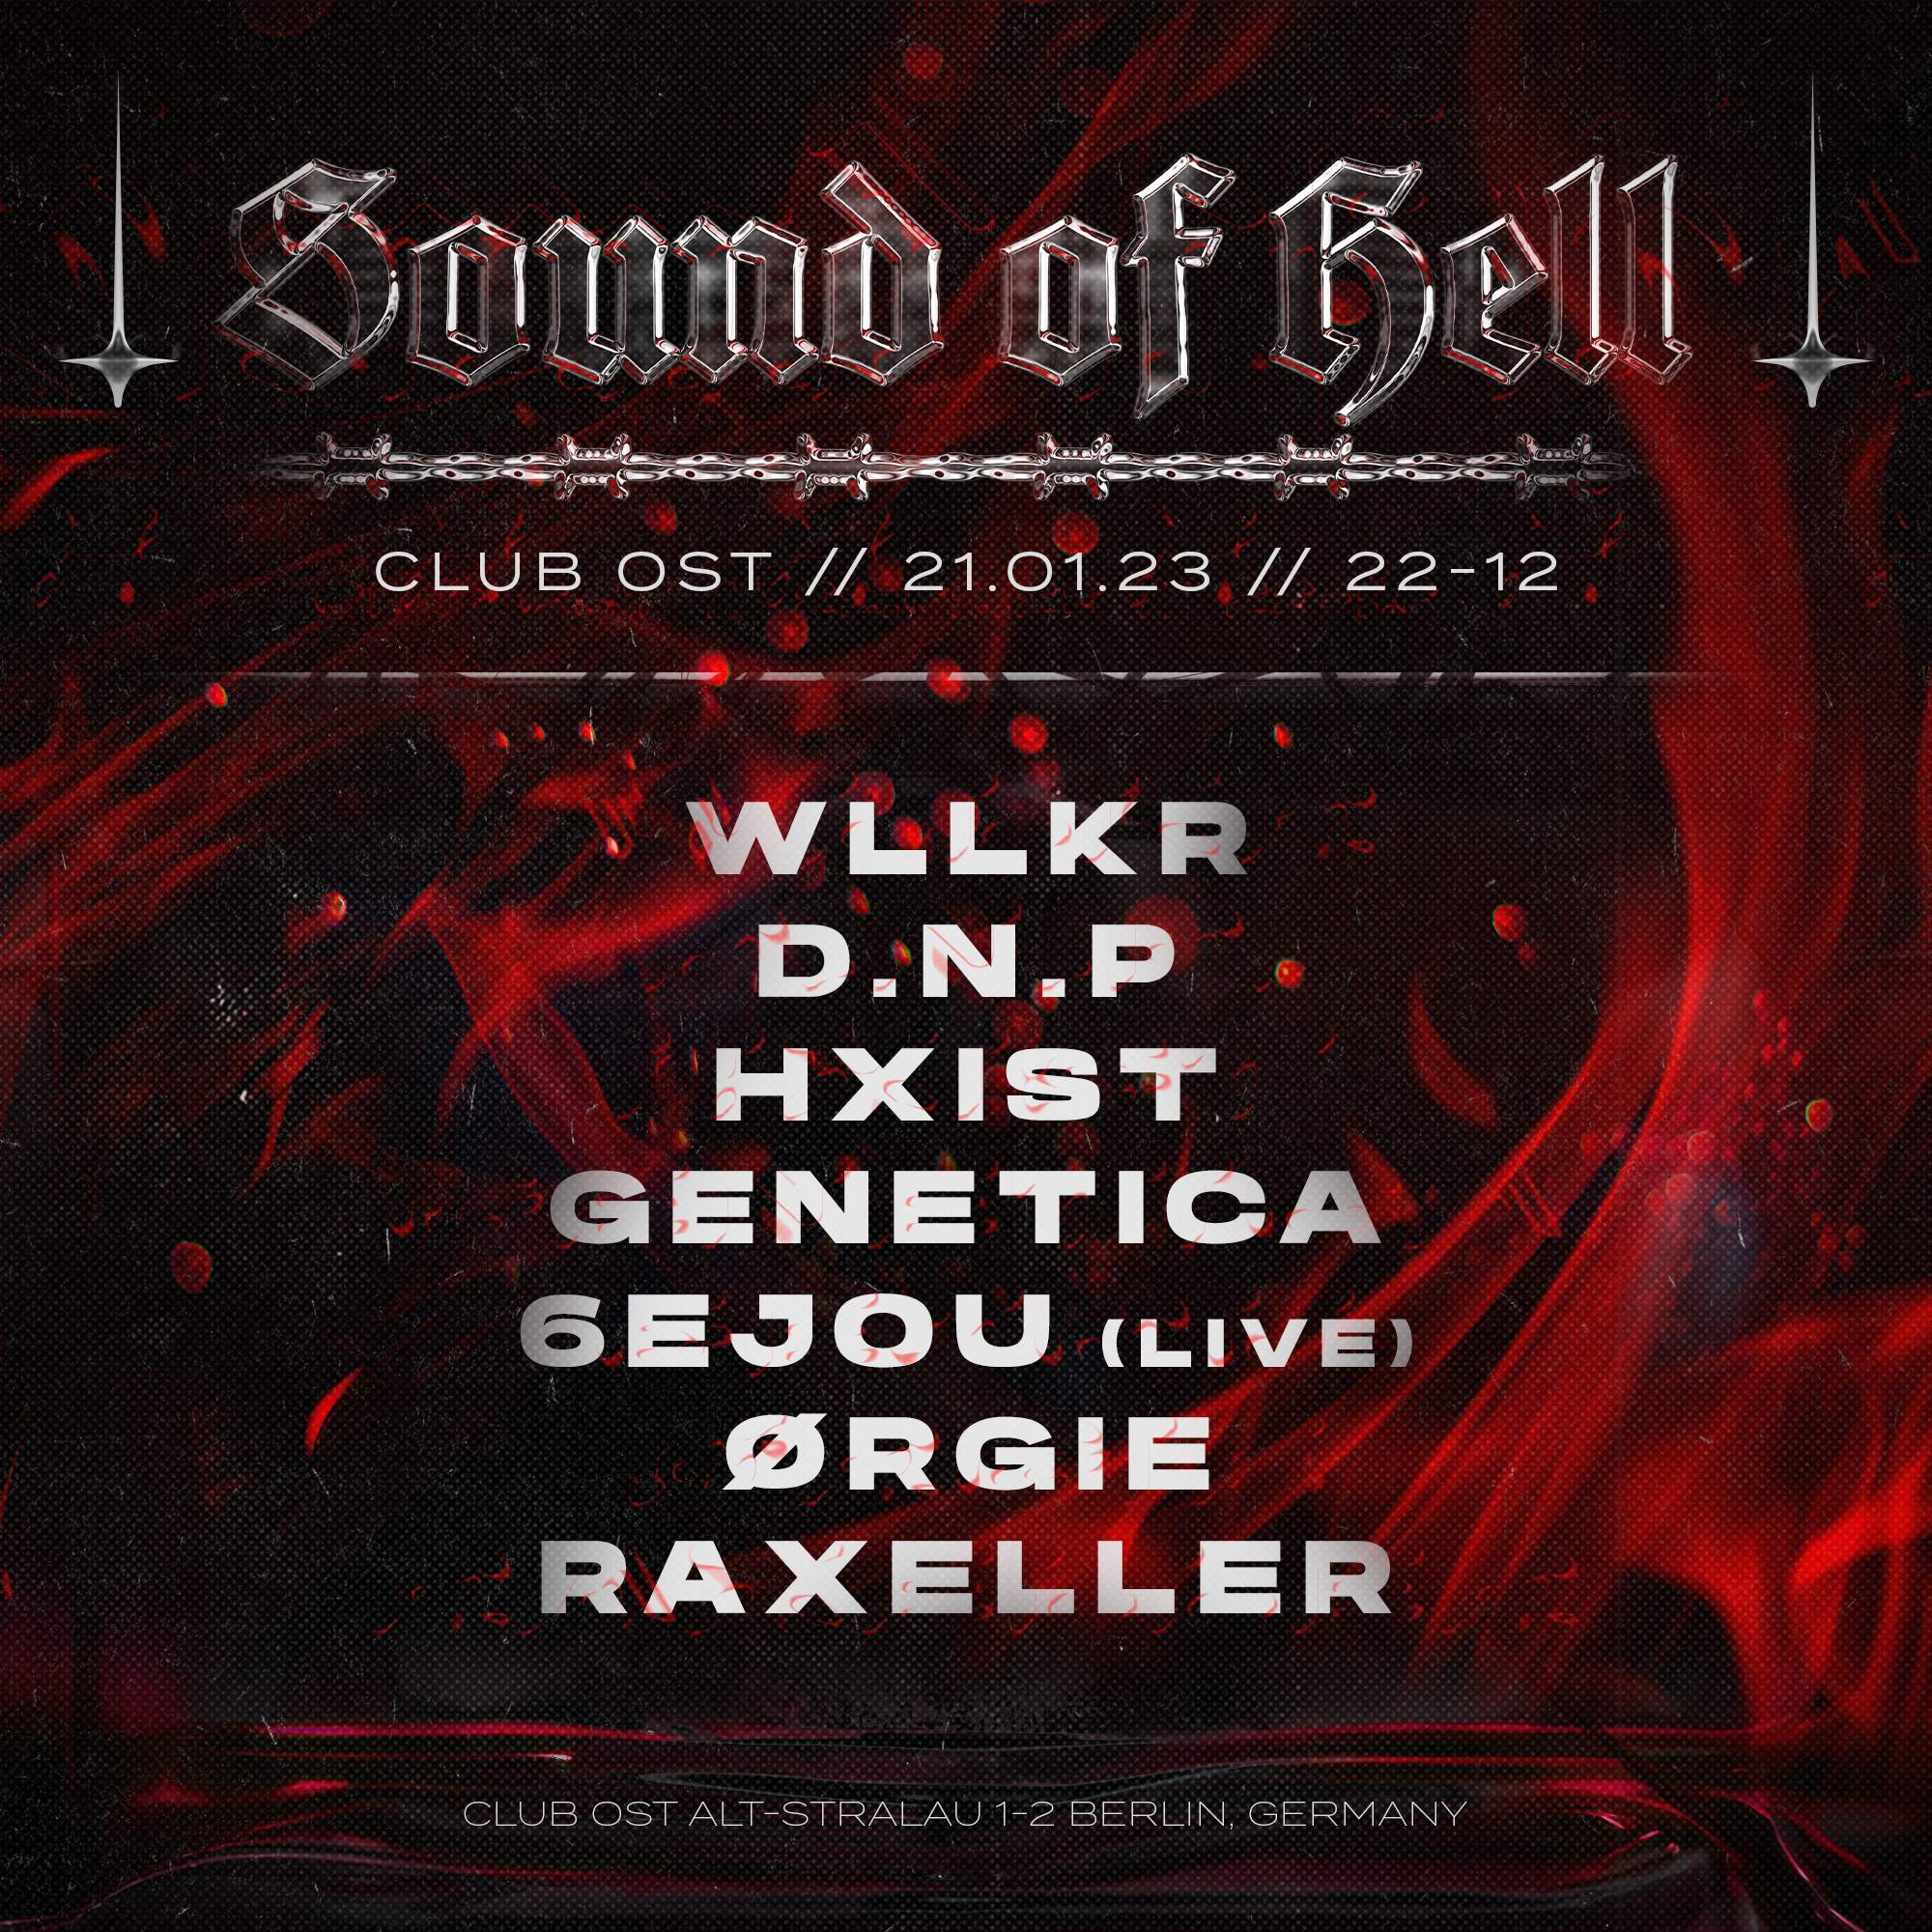 Sound of Hell w/ ØRGIE, 6EJOU (LIVE), Raxeller, HXIST at Club OST, Berlin